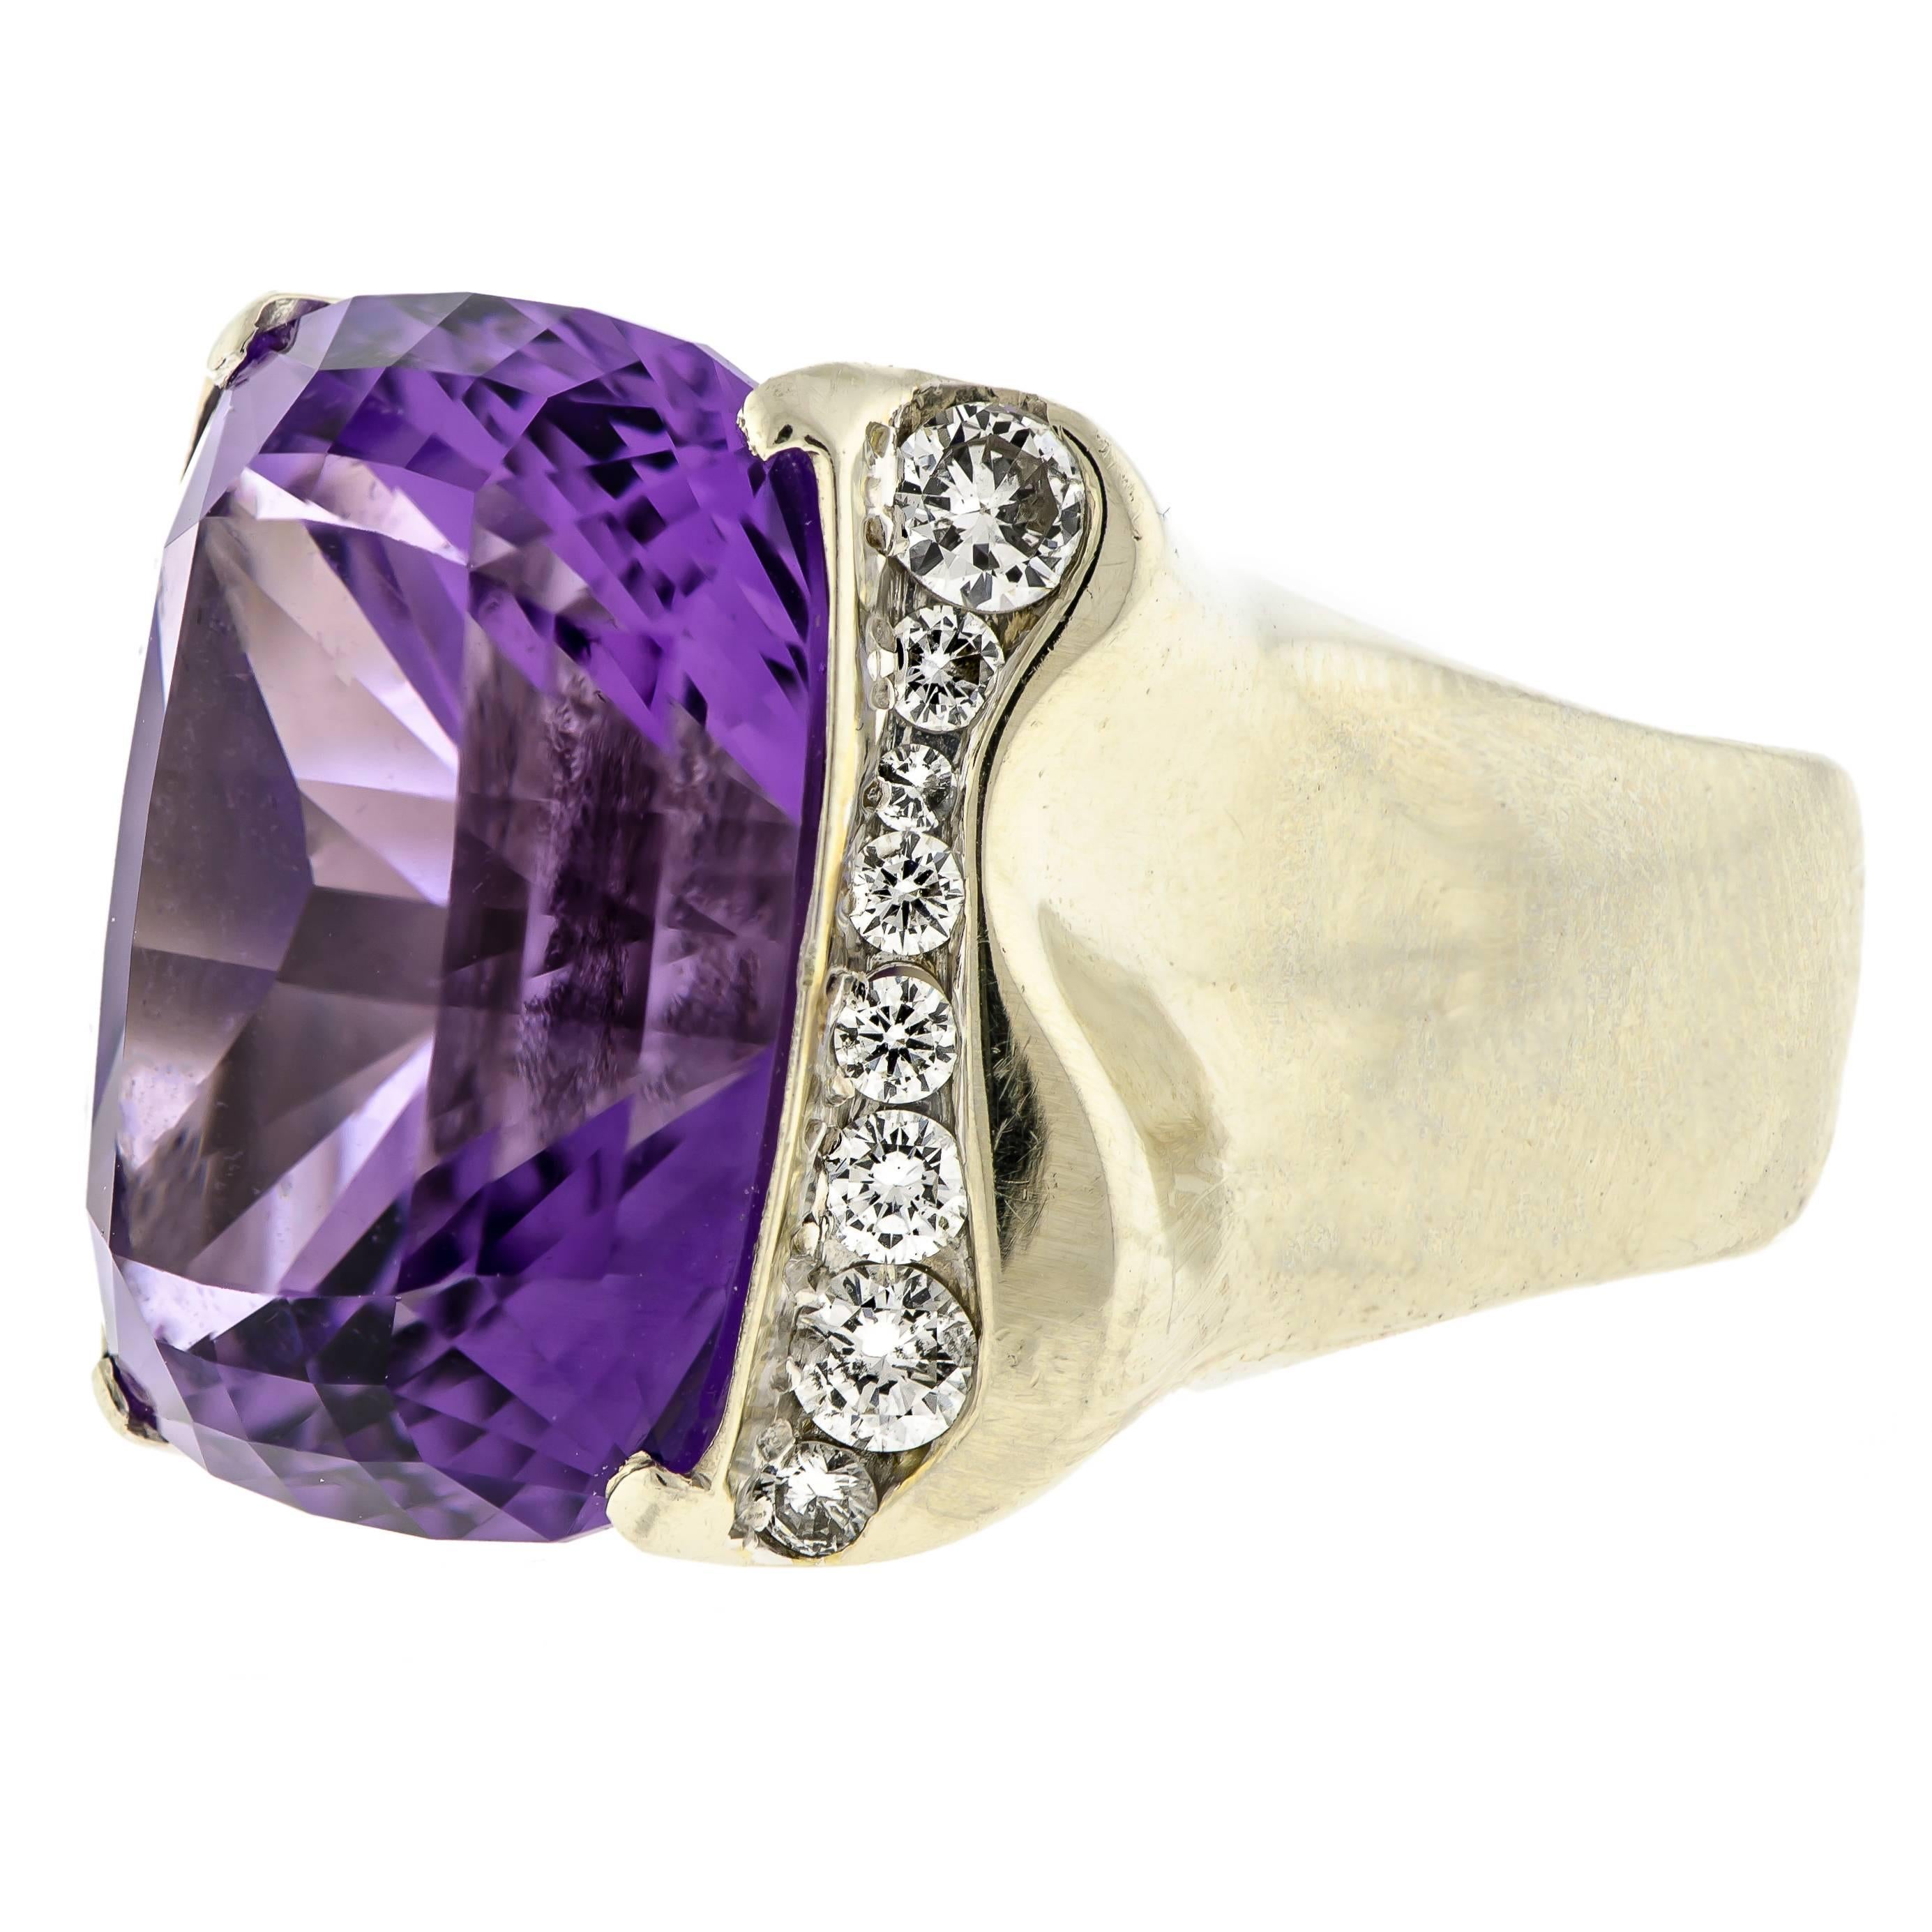 A White Gold, Amethyst and Diamond Ring, containing one cushion cut amethyst measuring approximately 20.28 x 15.54 x 13.93 mm and weighing approximately 20.50 carats, the shoulders accented with 16 round brilliant cut diamonds weighing approximately